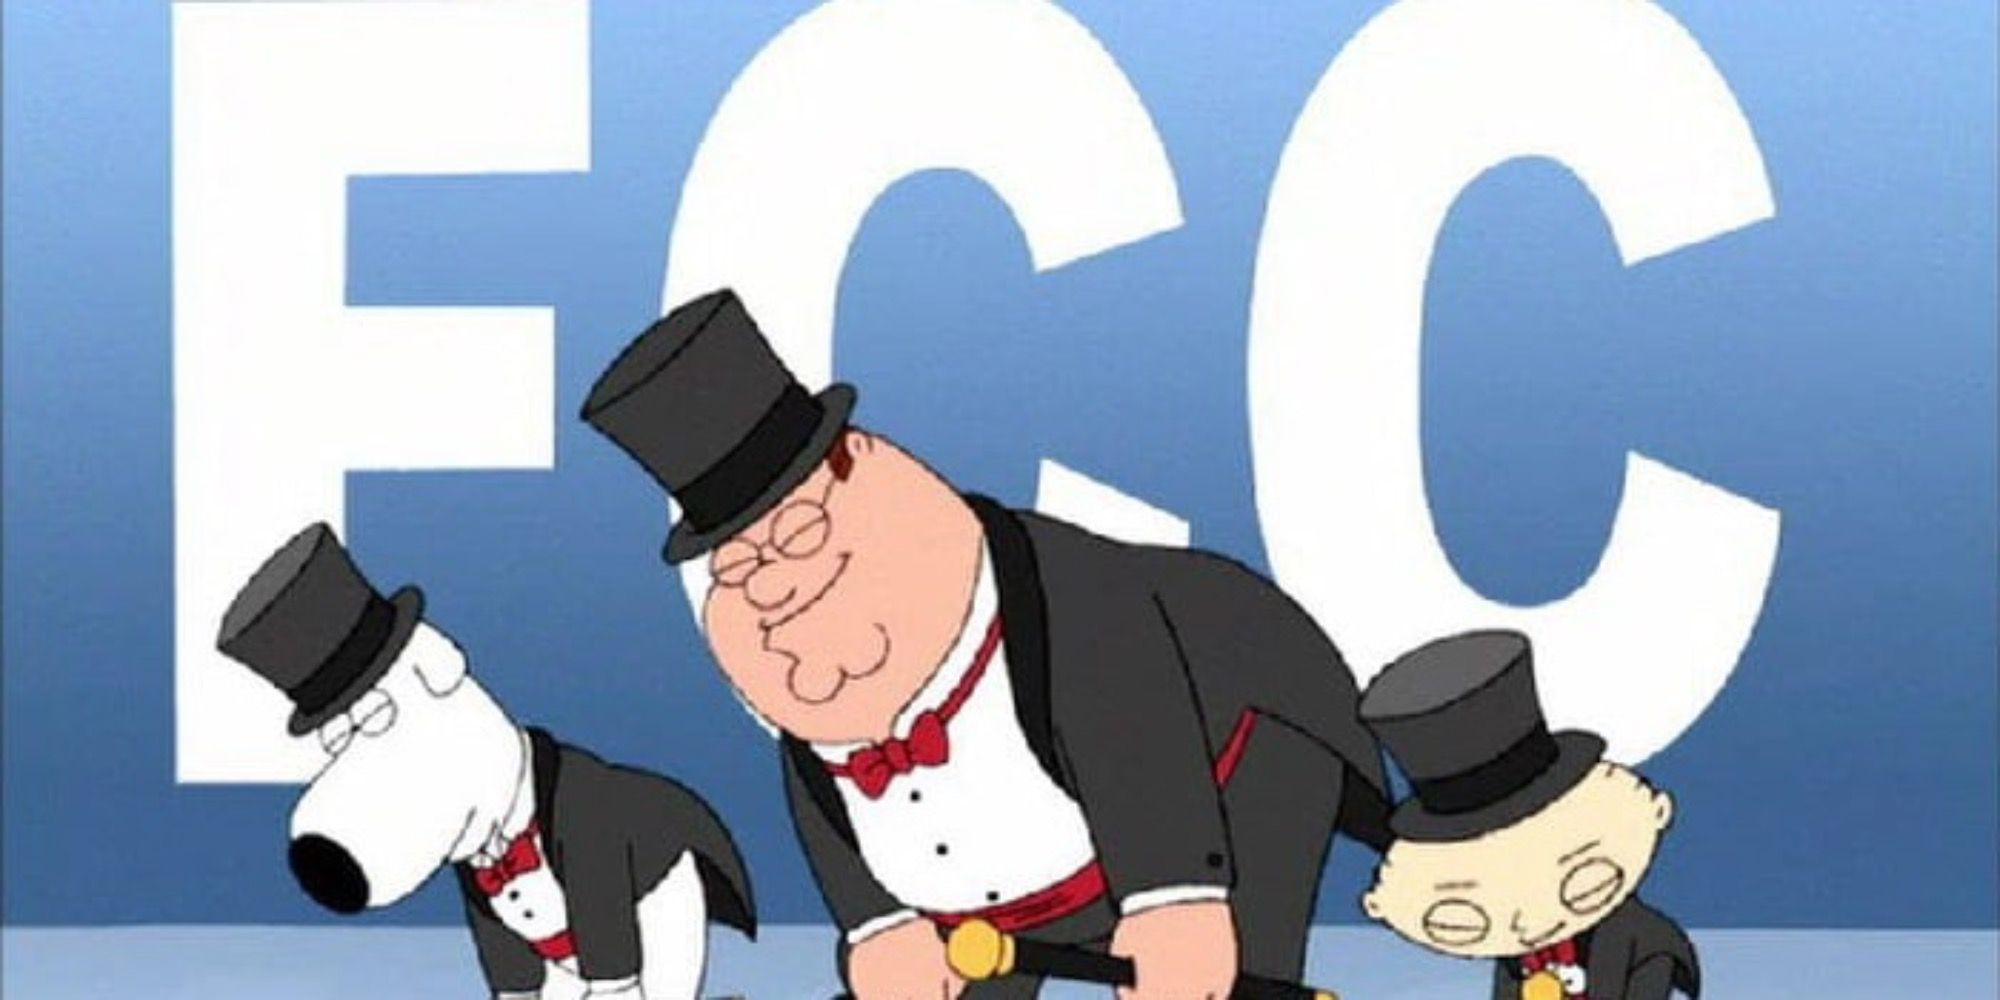 Brian, Peter, and Stewie in evening wear